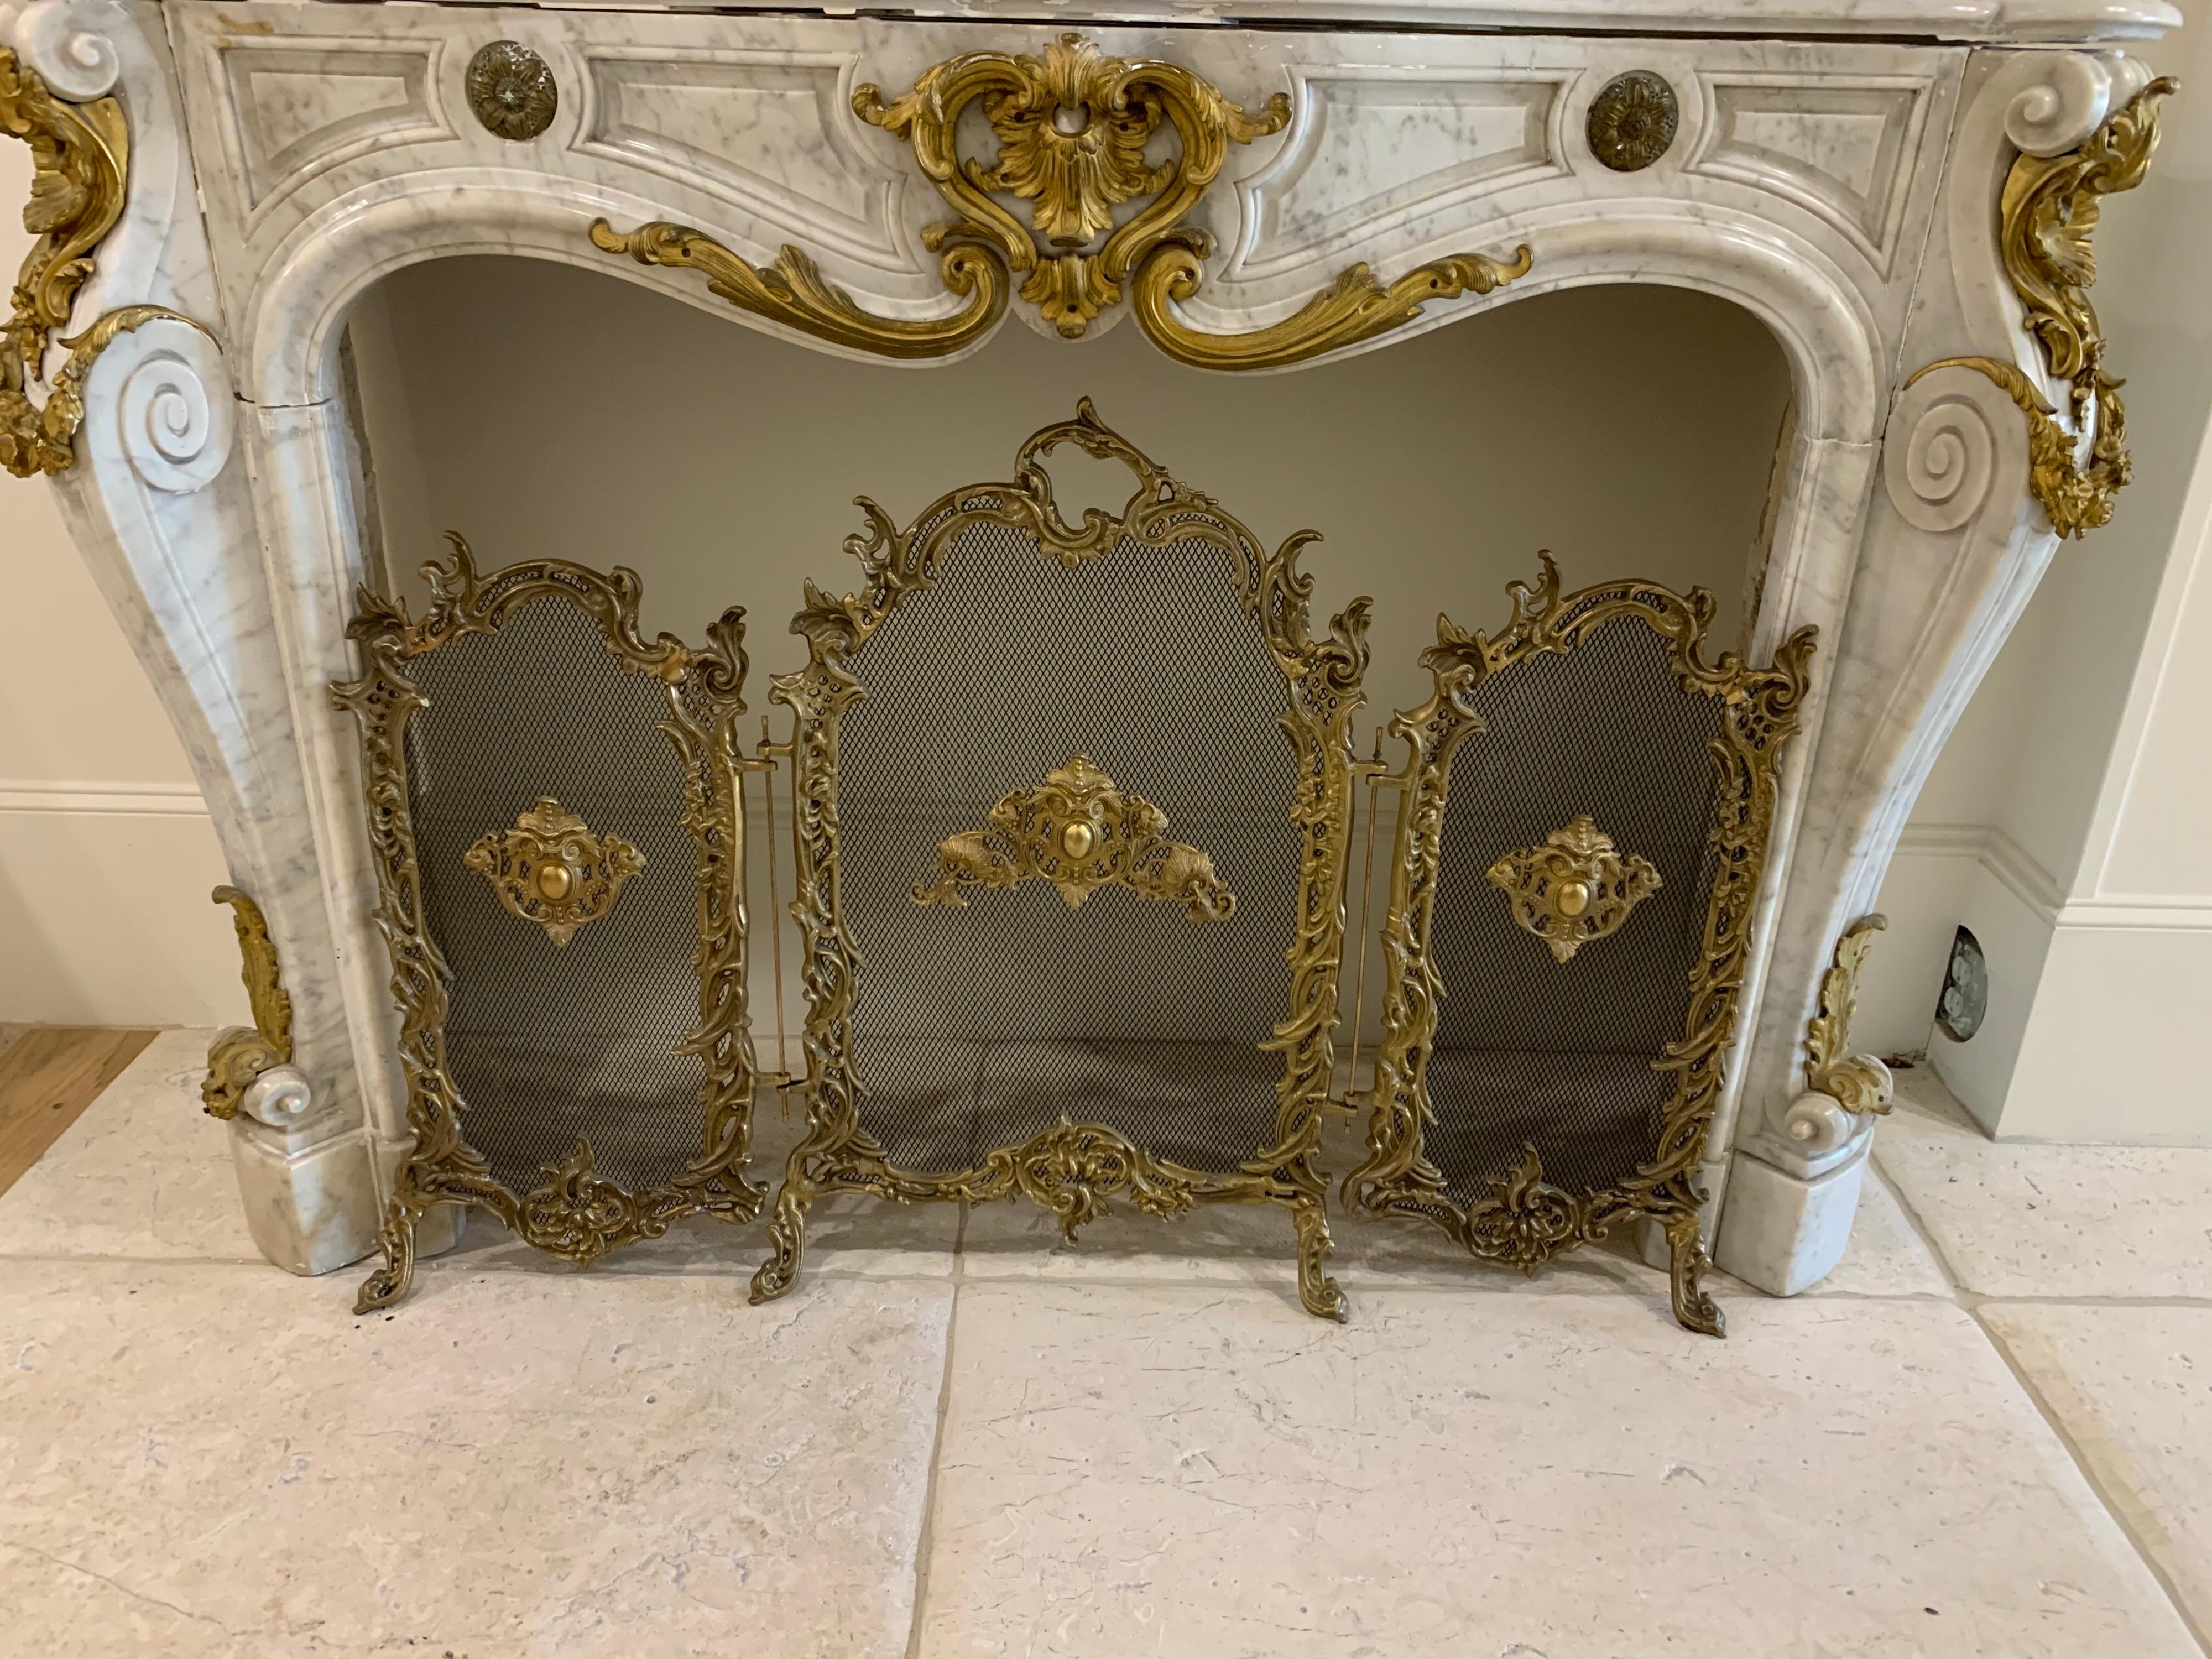 Very fine large French Louis XV style 3-panel fire screen. Gorgeous bronze details including crest like images and other intertwined pieces. Creates a real touch of elegance!